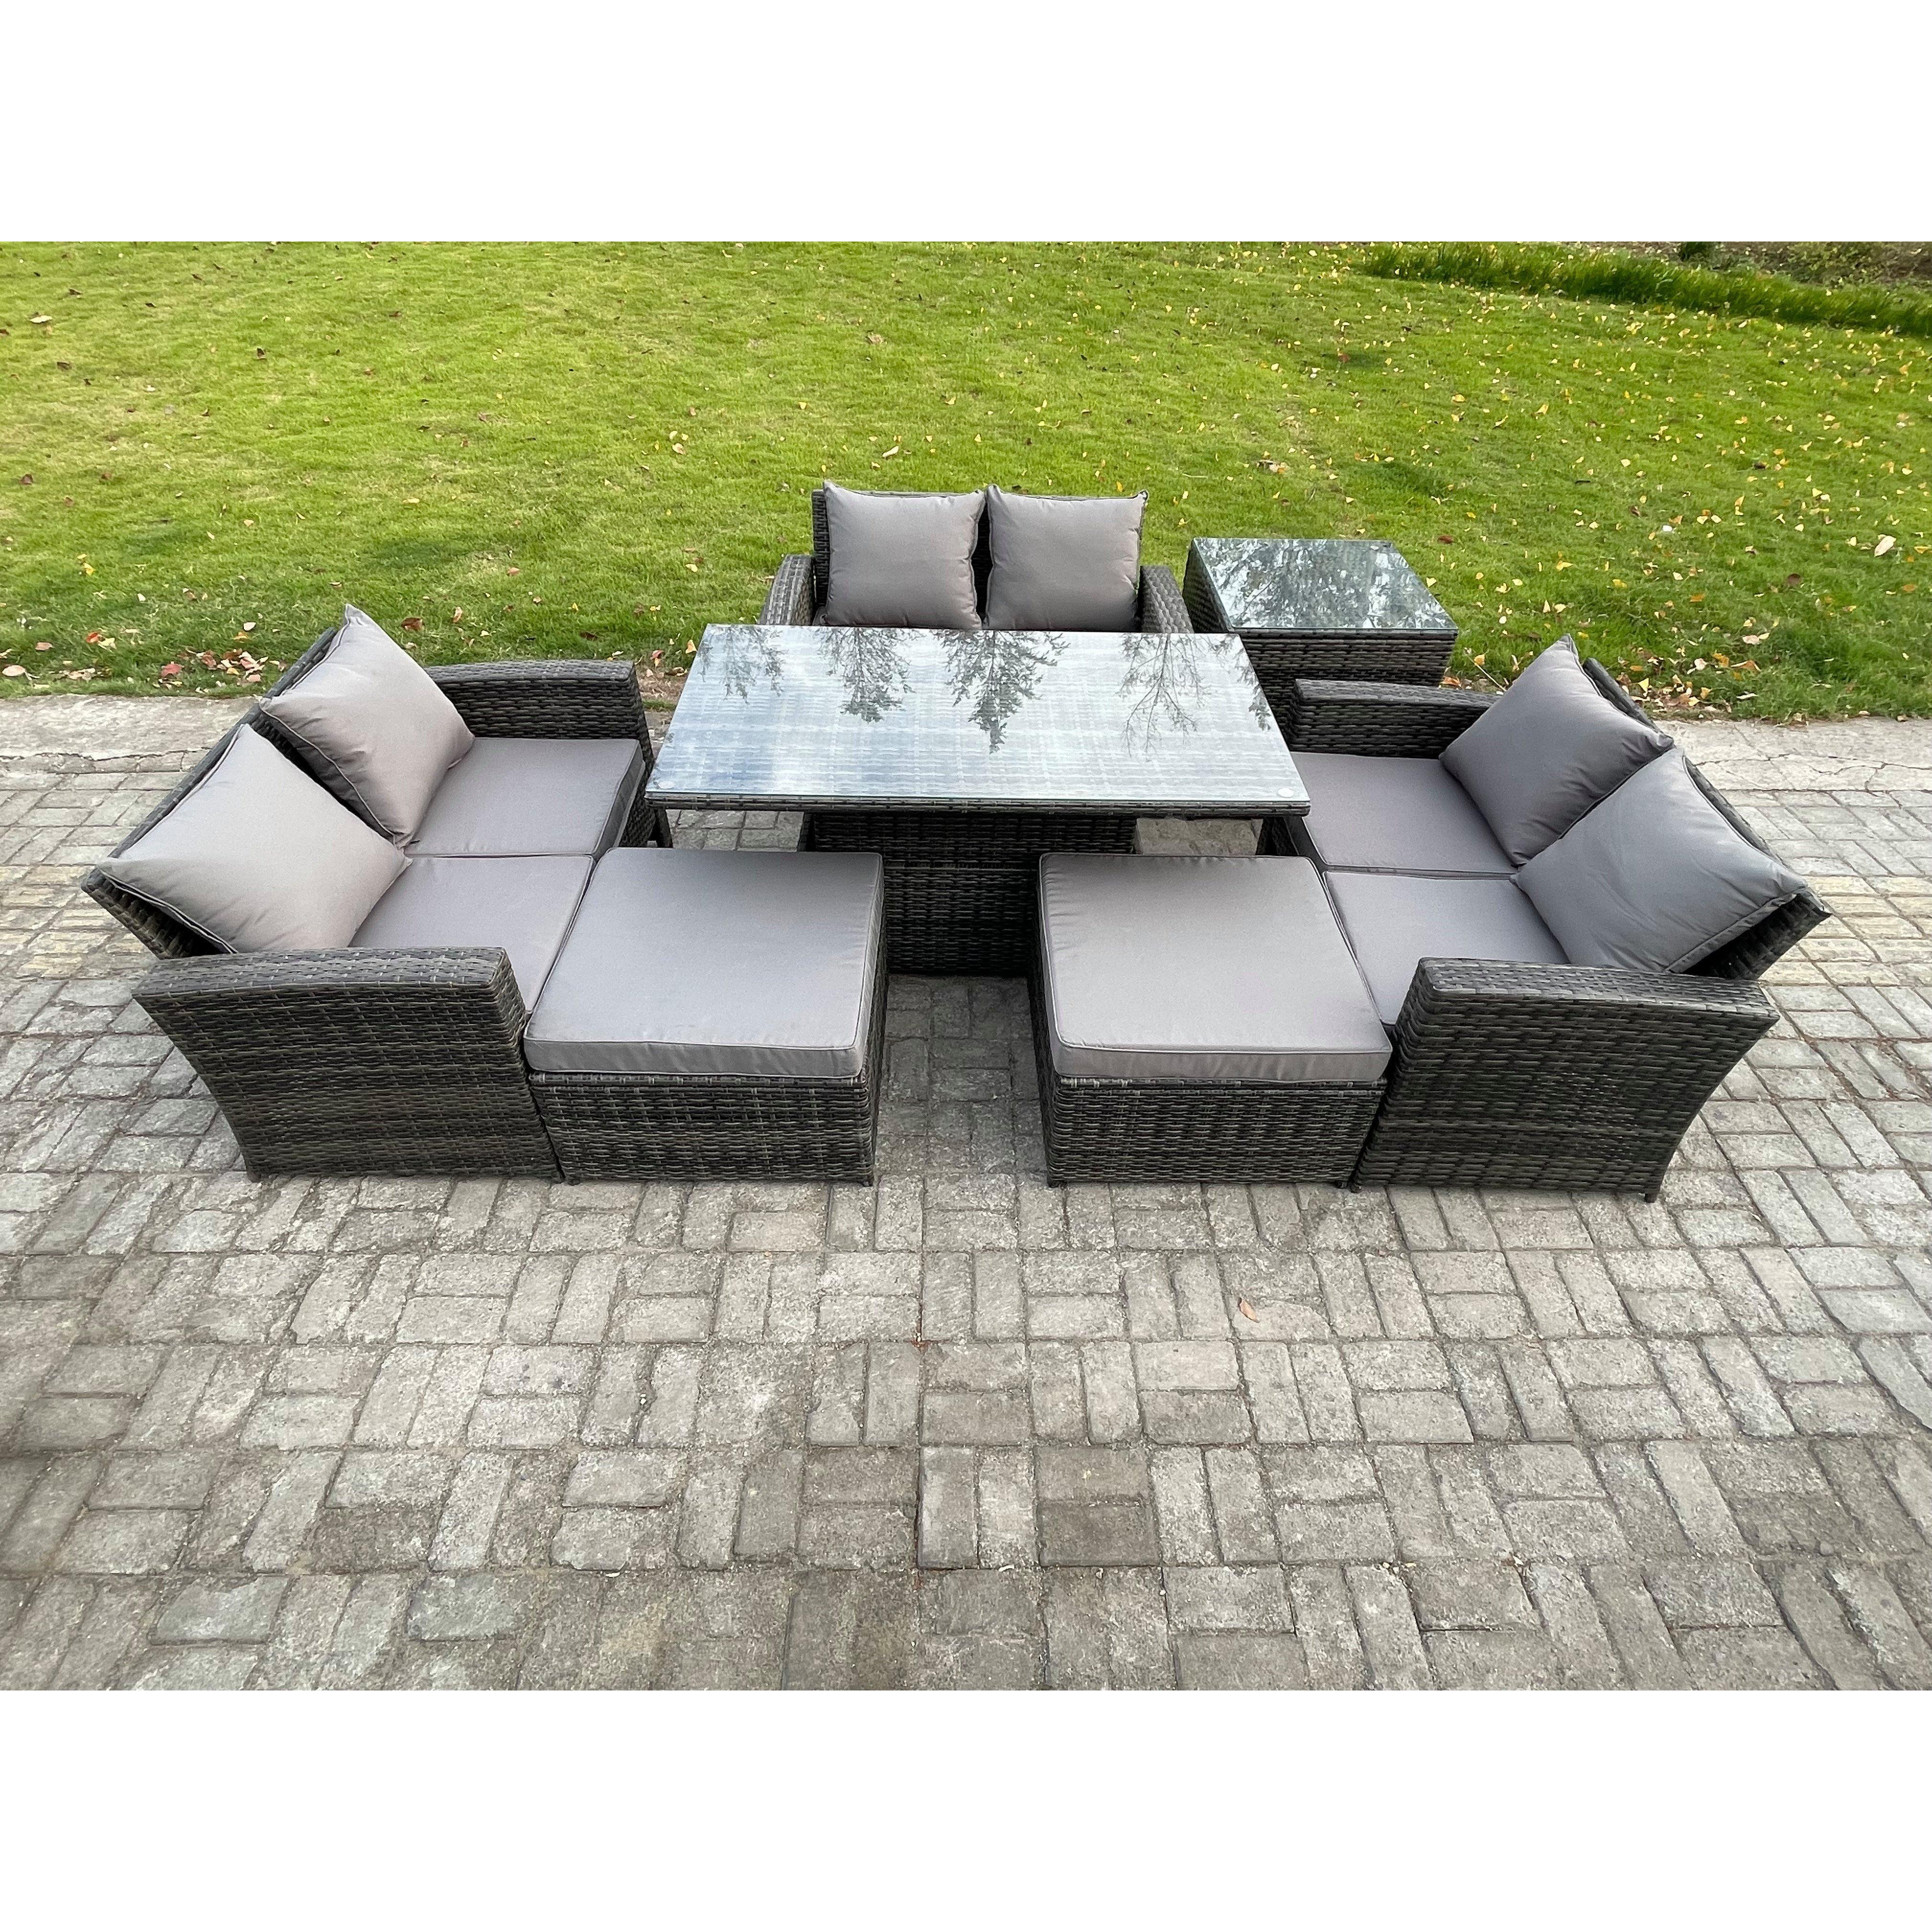 Wicker PE Rattan Garden Furniture Set Height Adjustable Rising Lifting Table Sofa Dining Set with 2 Big Footstool - image 1